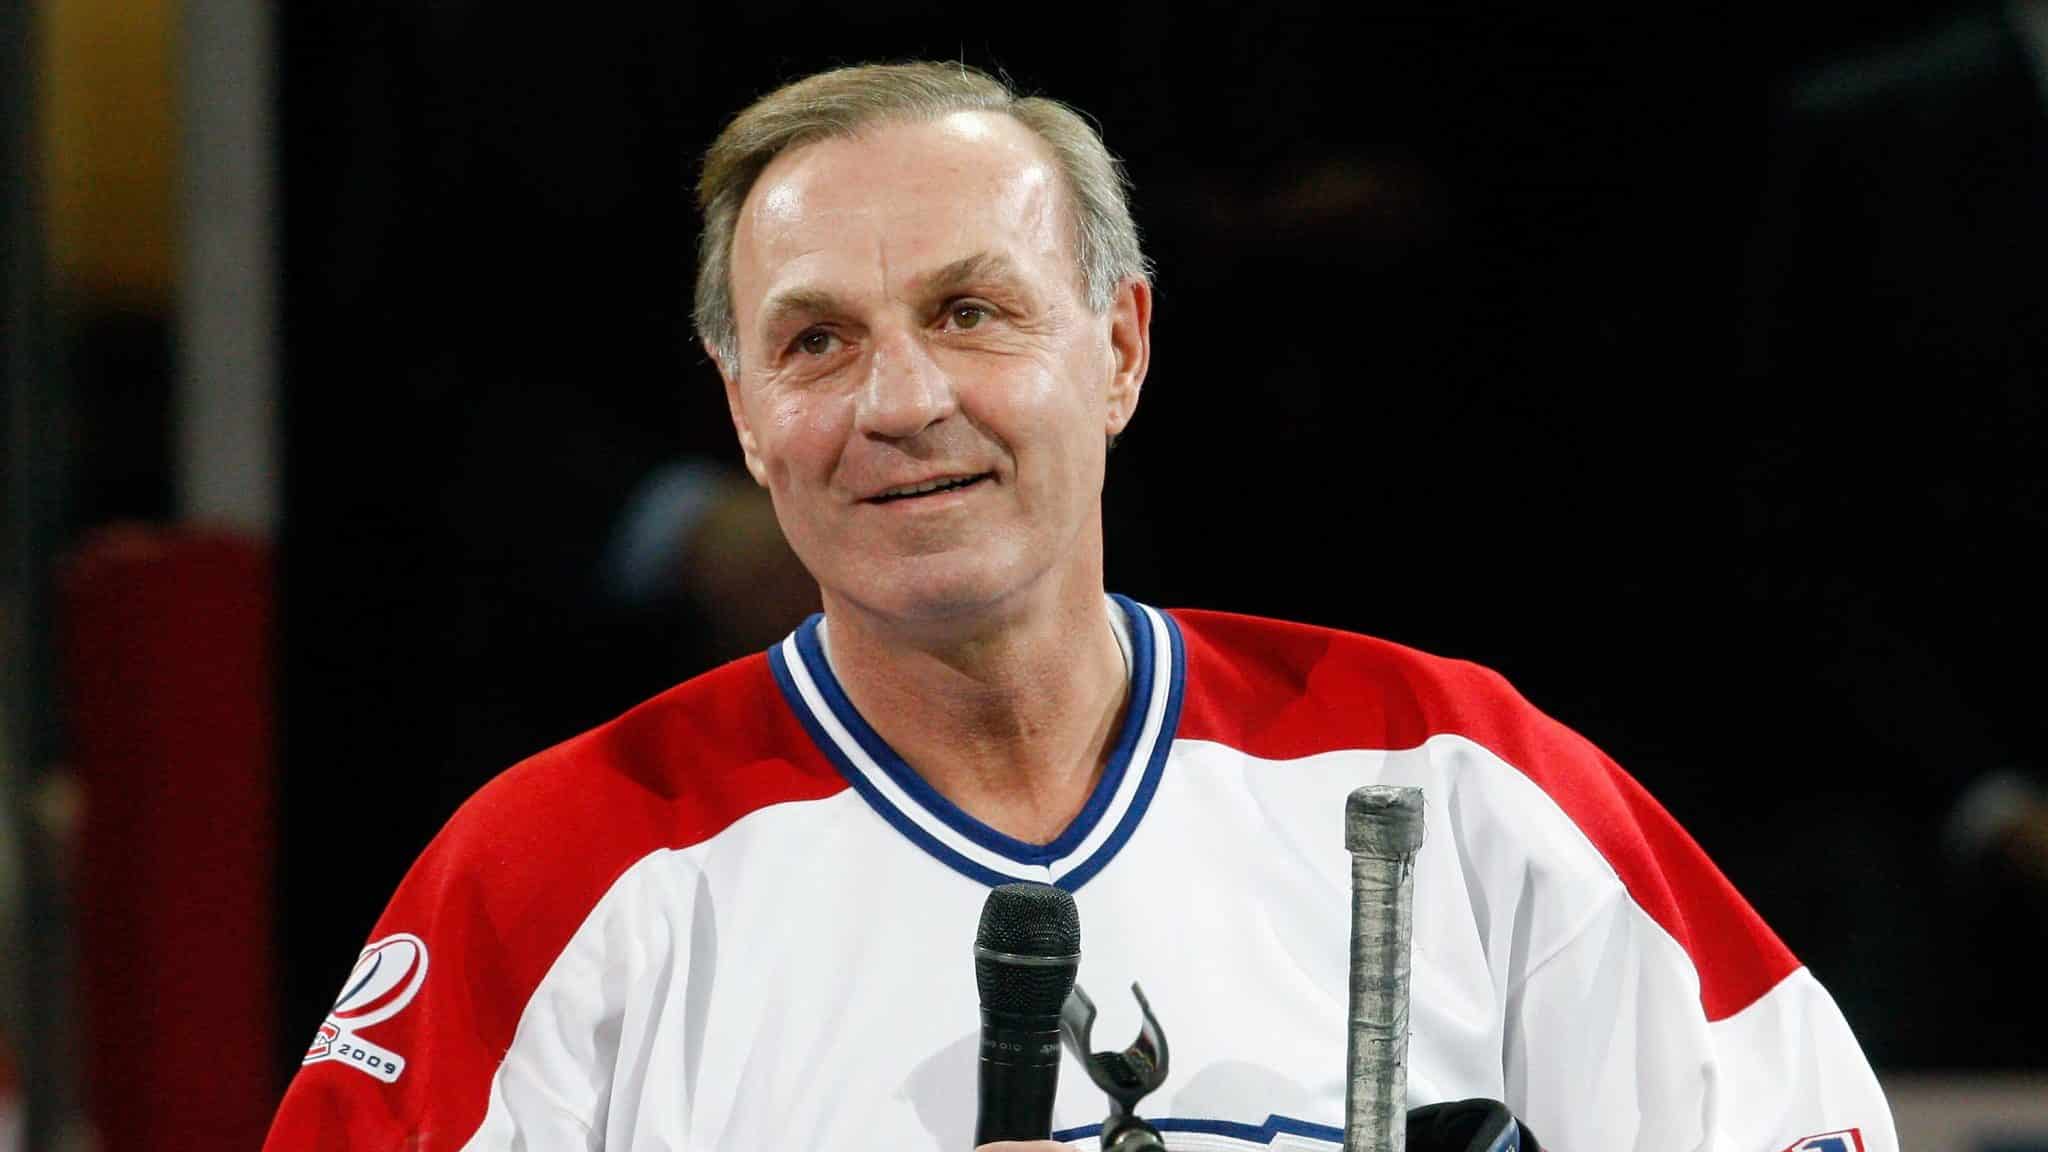 MONTREAL- DECEMBER 4: Former Montreal Canadien Guy Lafleur speaks to fans during the Centennial Celebration ceremonies prior to the NHL game between the Montreal Canadiens and Boston Bruins on December 4, 2009 at the Bell Centre in Montreal, Quebec, Canada. The Canadiens defeated the Bruins 5-1.